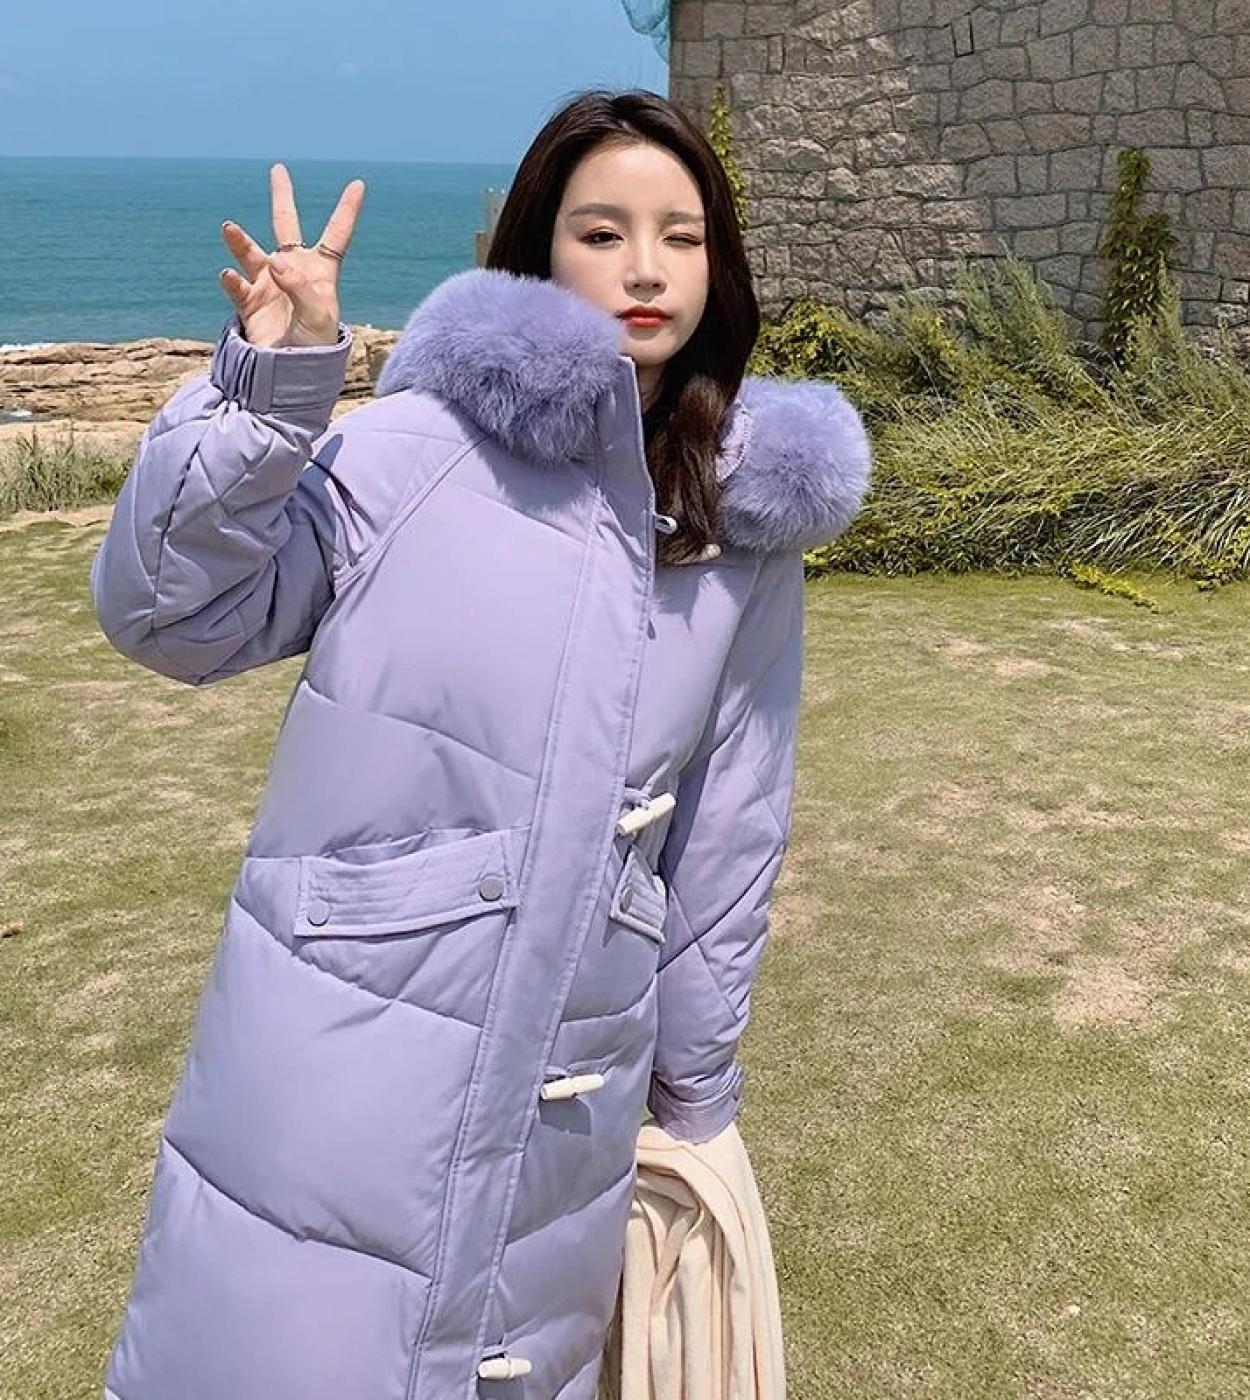 2022 New Winter Jackets Womens Parkas Fur Collar Hooded Thicken Warm Long Coat Cotton Padded Jacket Outwear Female Park